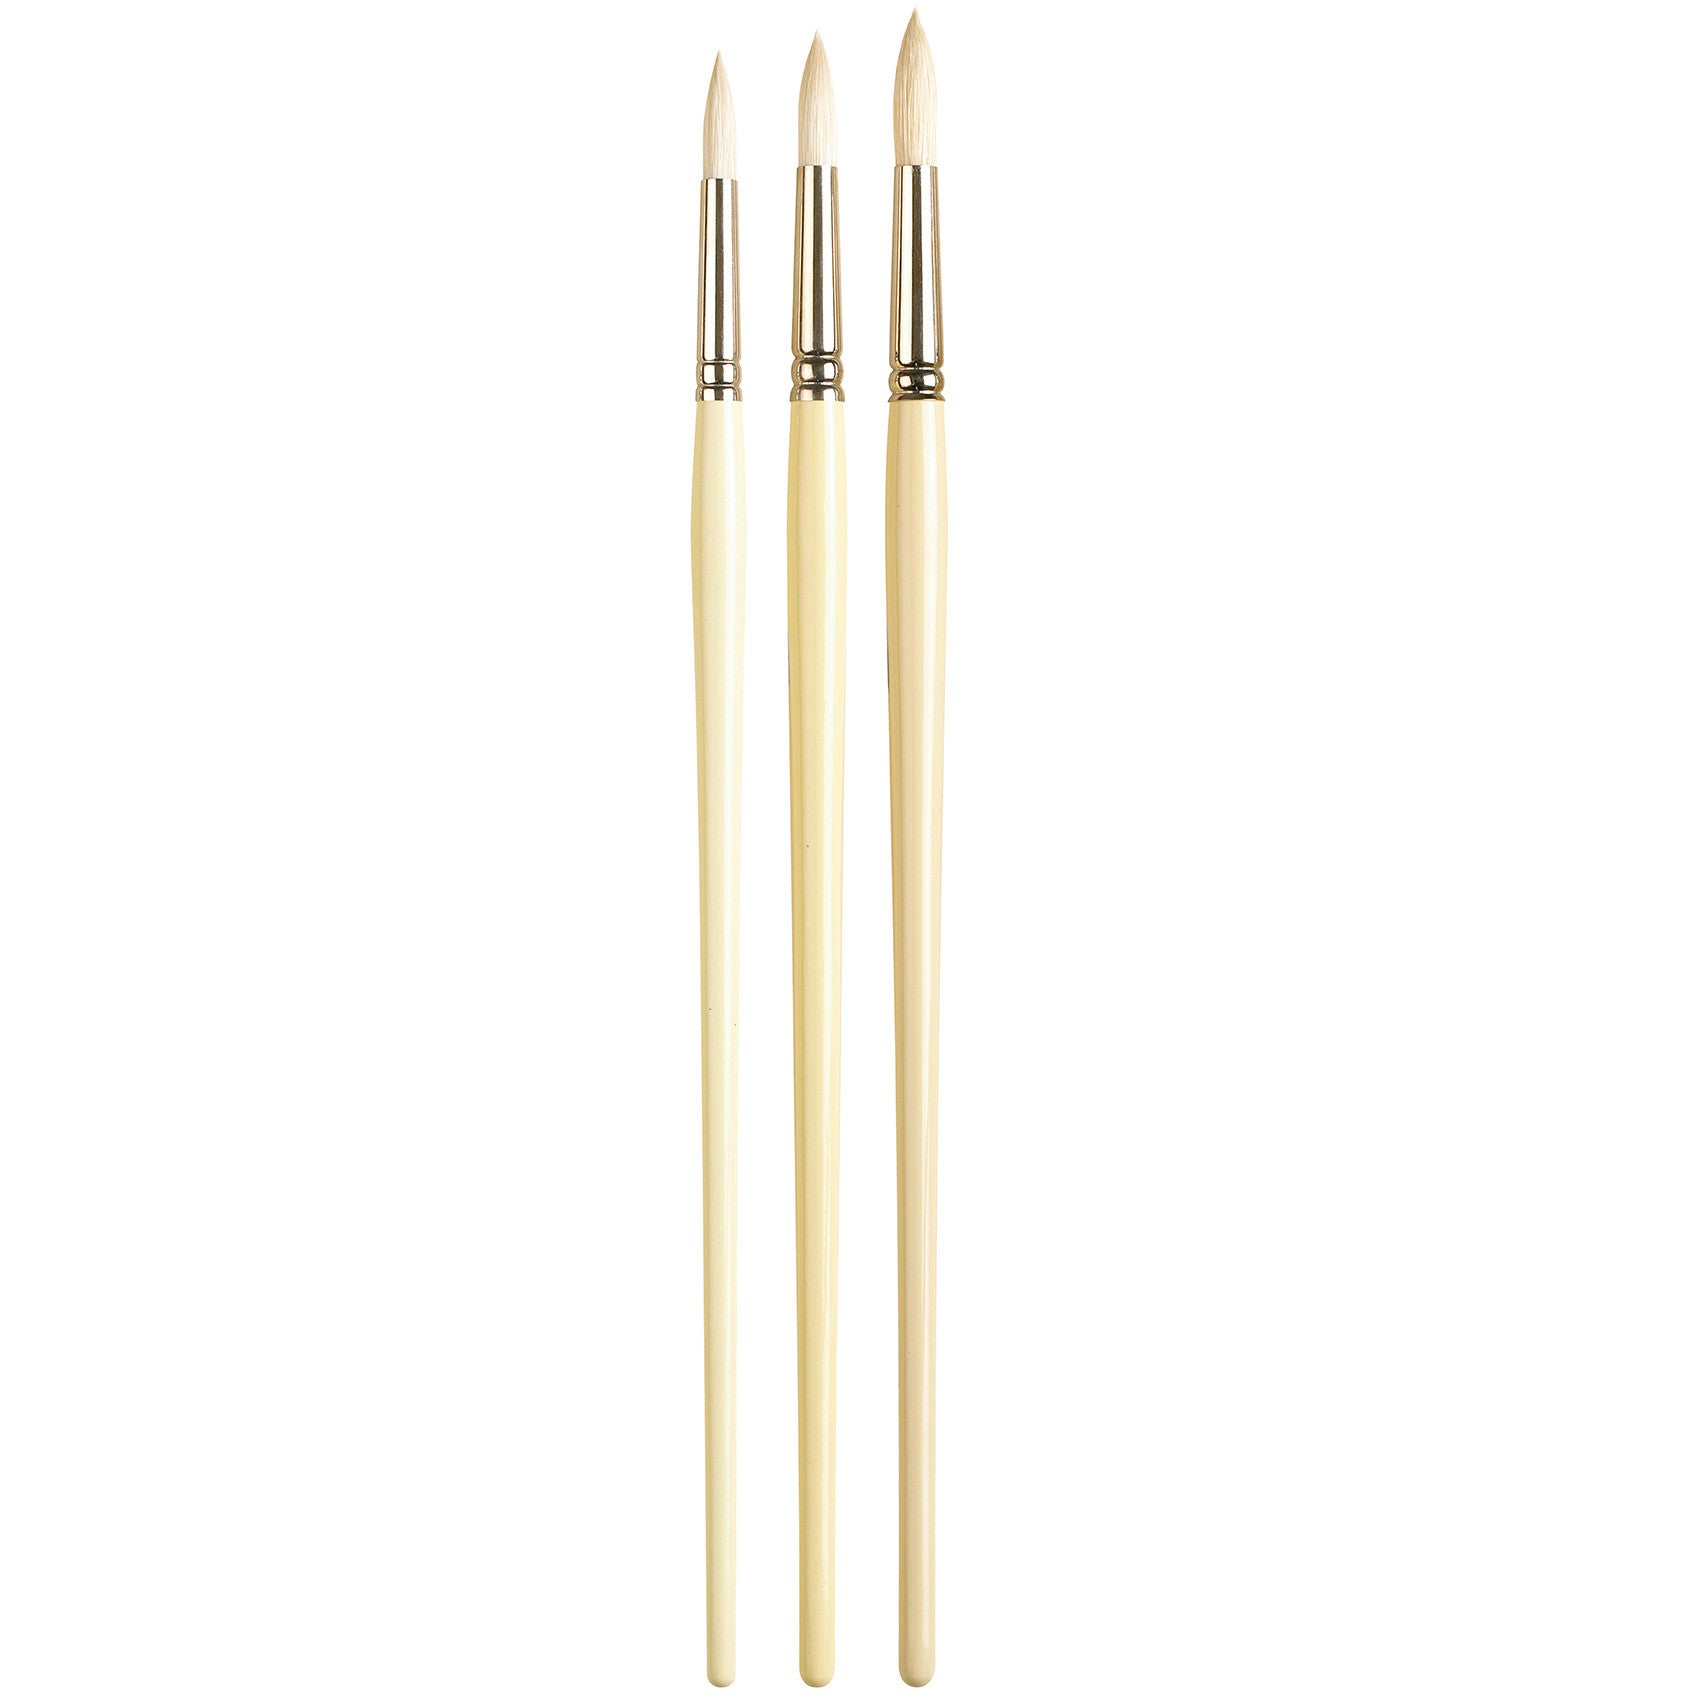 The Pro Arte Series B is a fine range of hog brushes at a lower price than Series A, yet made from a similar high grade of Chinese Chungking bristle. These tools are designed for quality and performance, offering users a dependable and strong bristle for a variety of painting techniques.